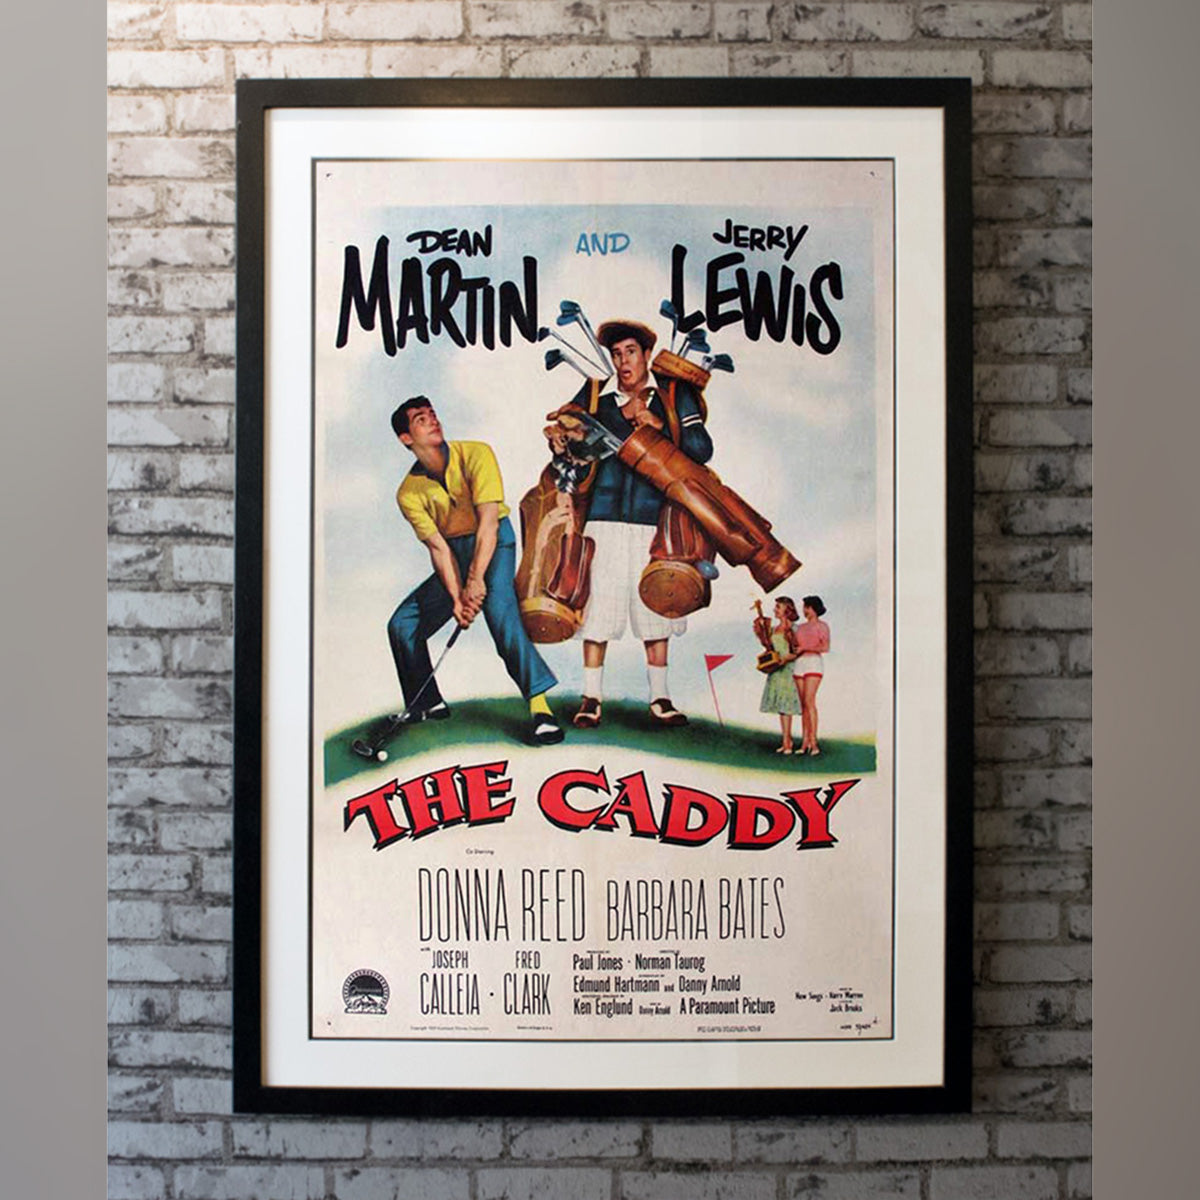 Original Movie Poster of Caddy, The (1953)